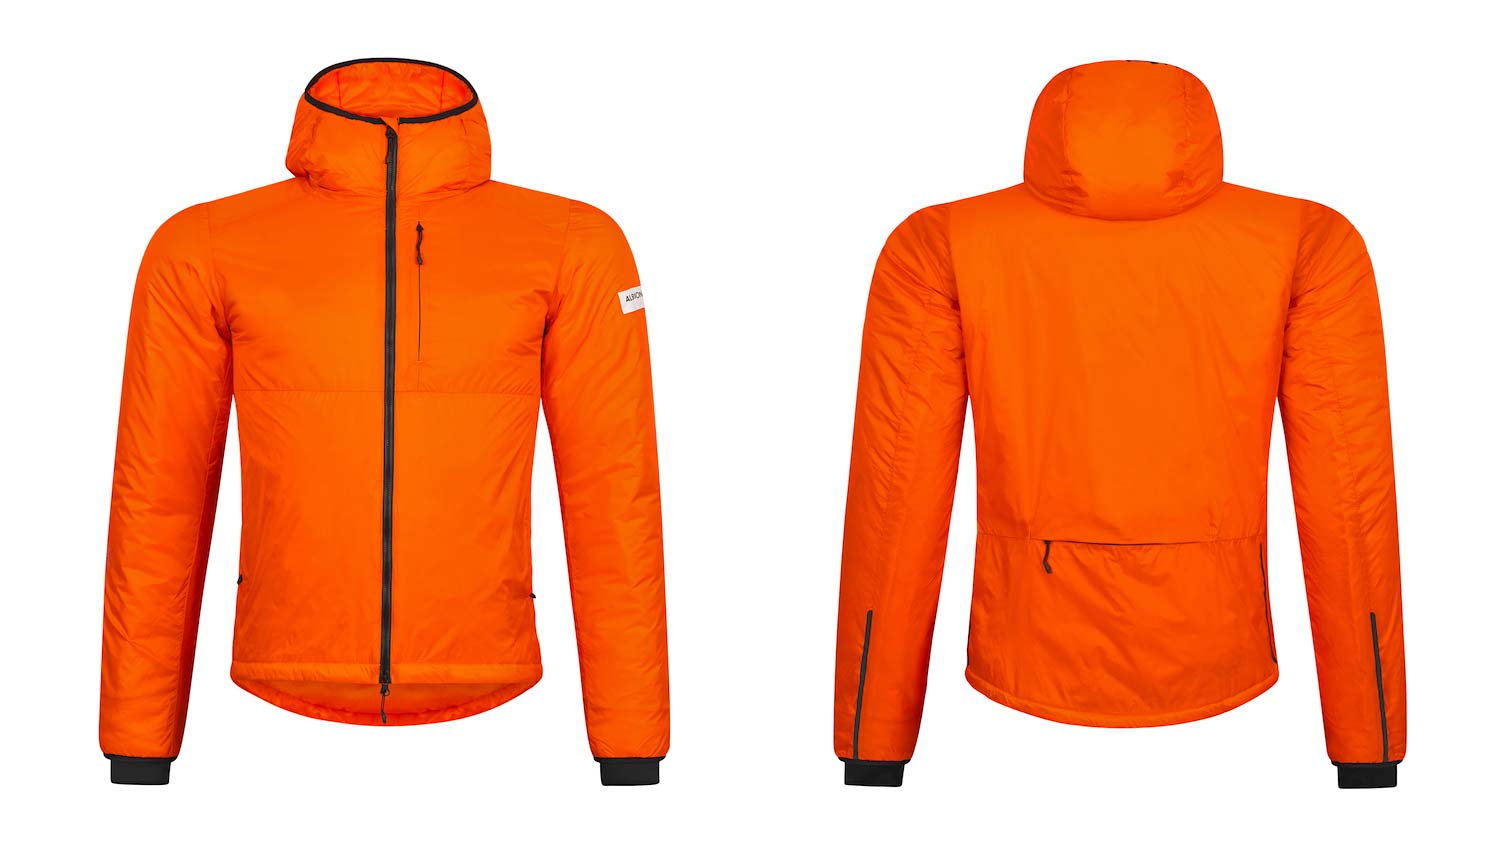 Albion Zoa Insulated Jacket, recycled Pertex fabrics, front & back in orange